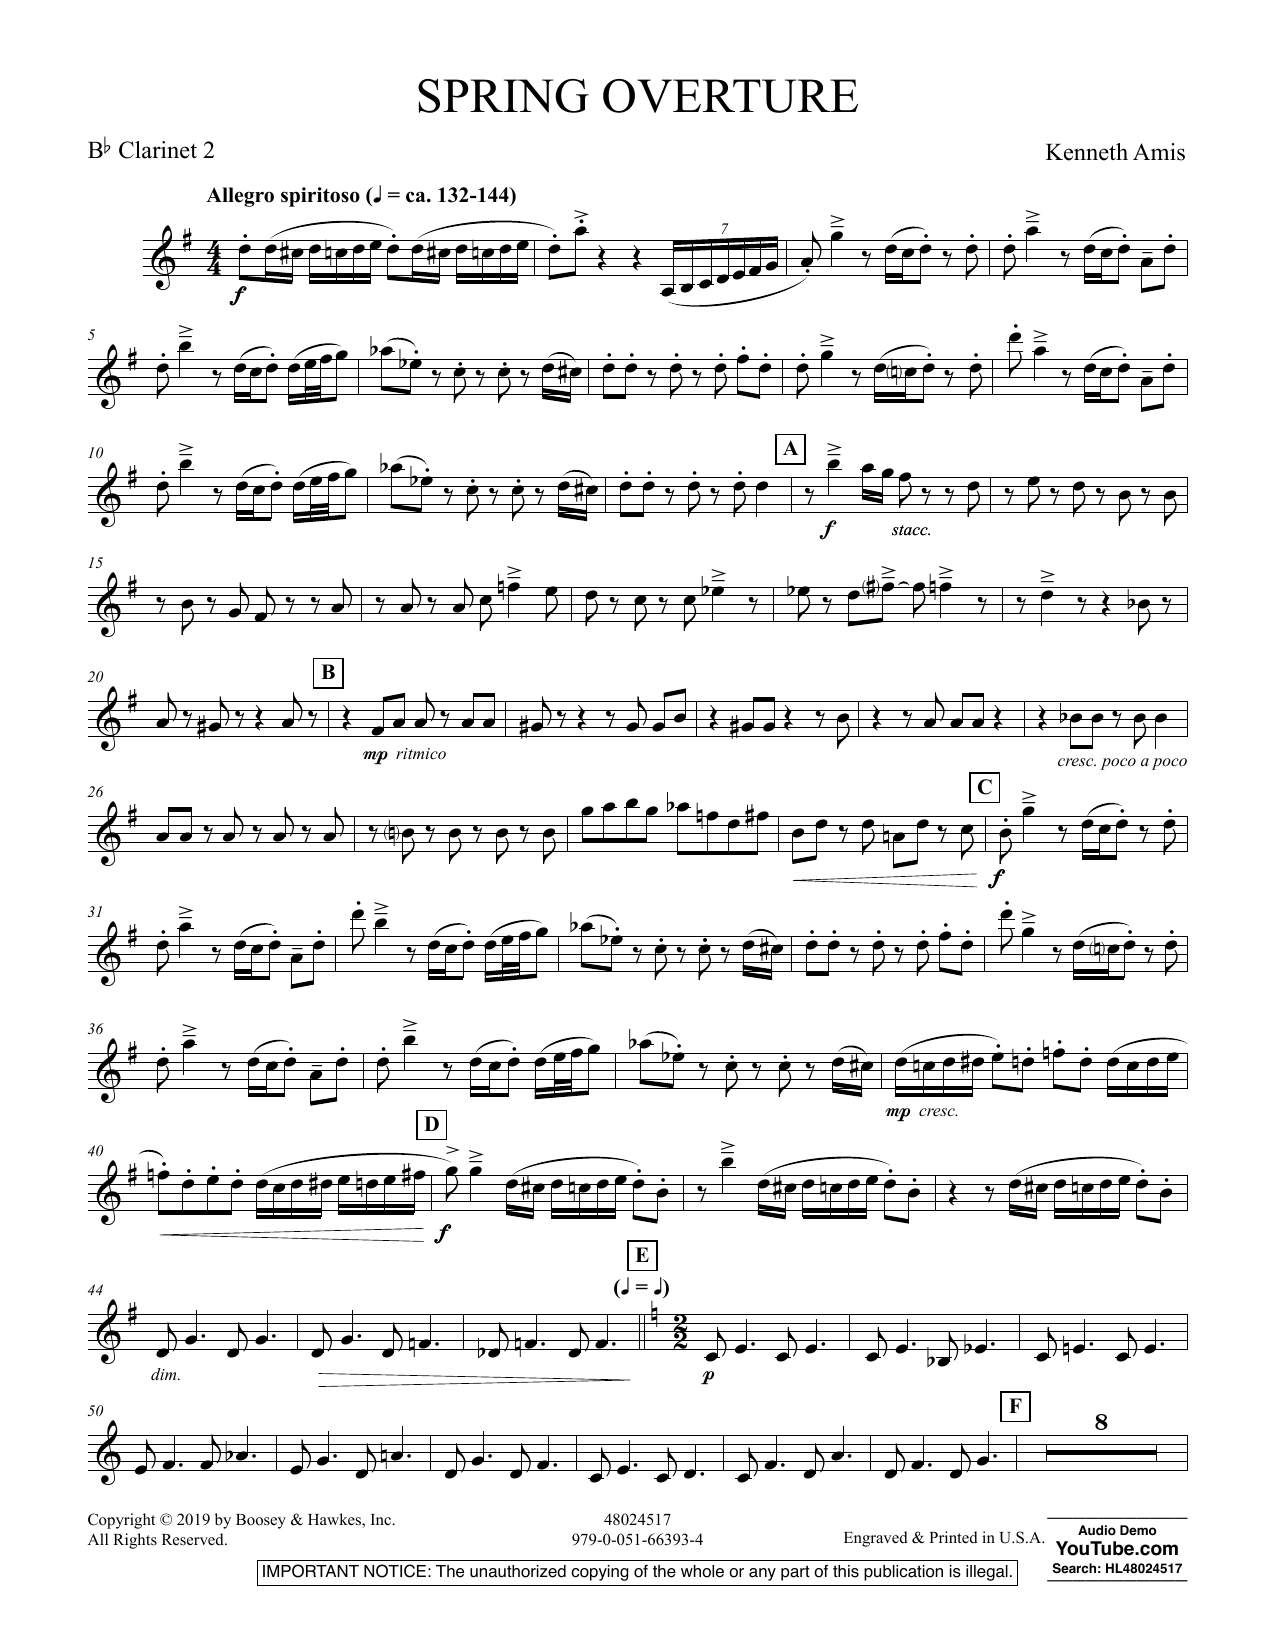 Kenneth Amis Spring Overture - Bb Clarinet 2 sheet music preview music notes and score for Concert Band including 4 page(s)